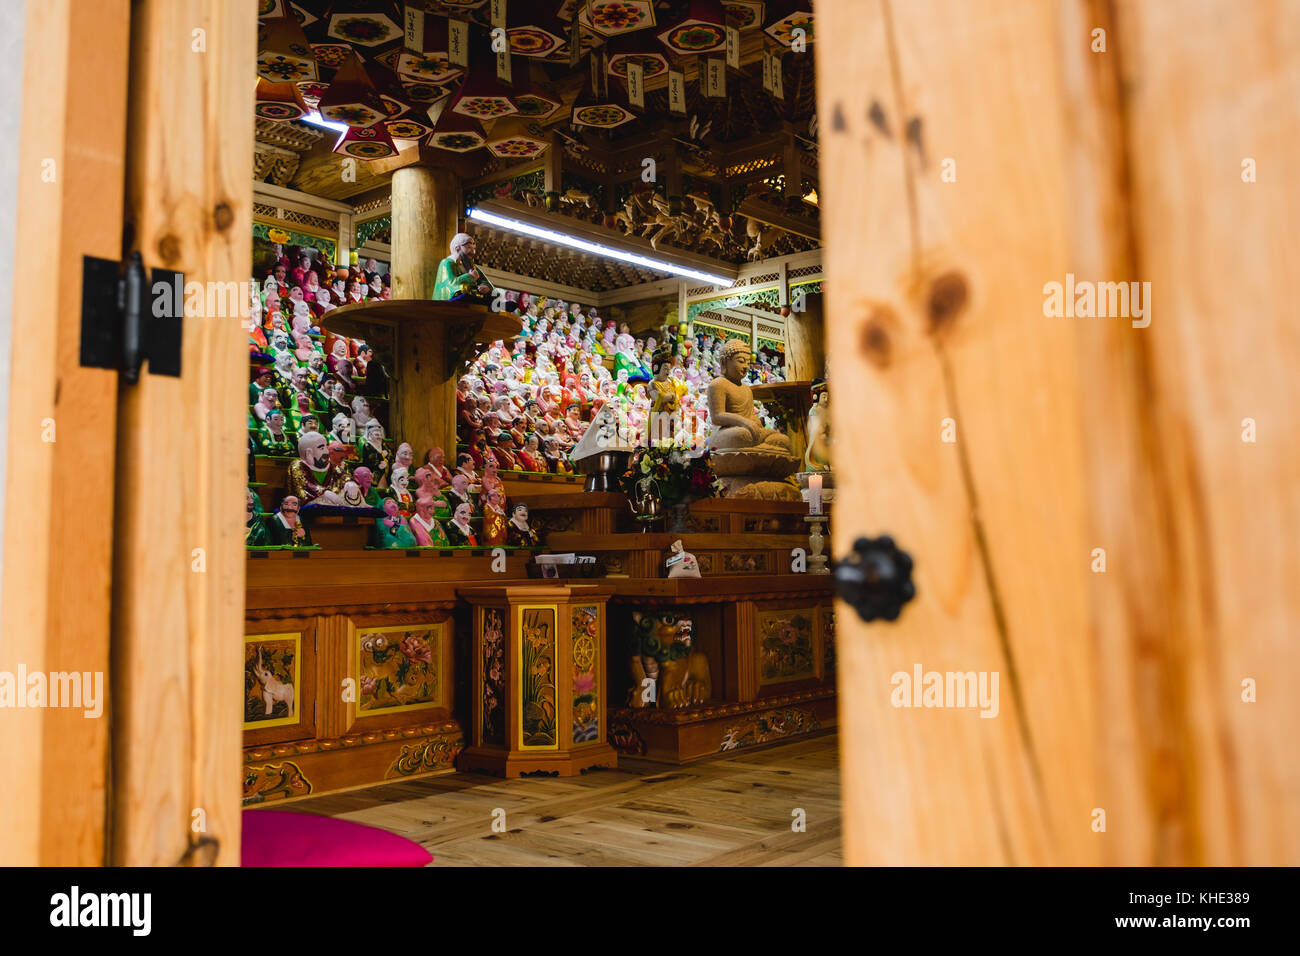 A view inside a temple building showing a collection of statues and figurines. Seoul, South Korea. Stock Photo